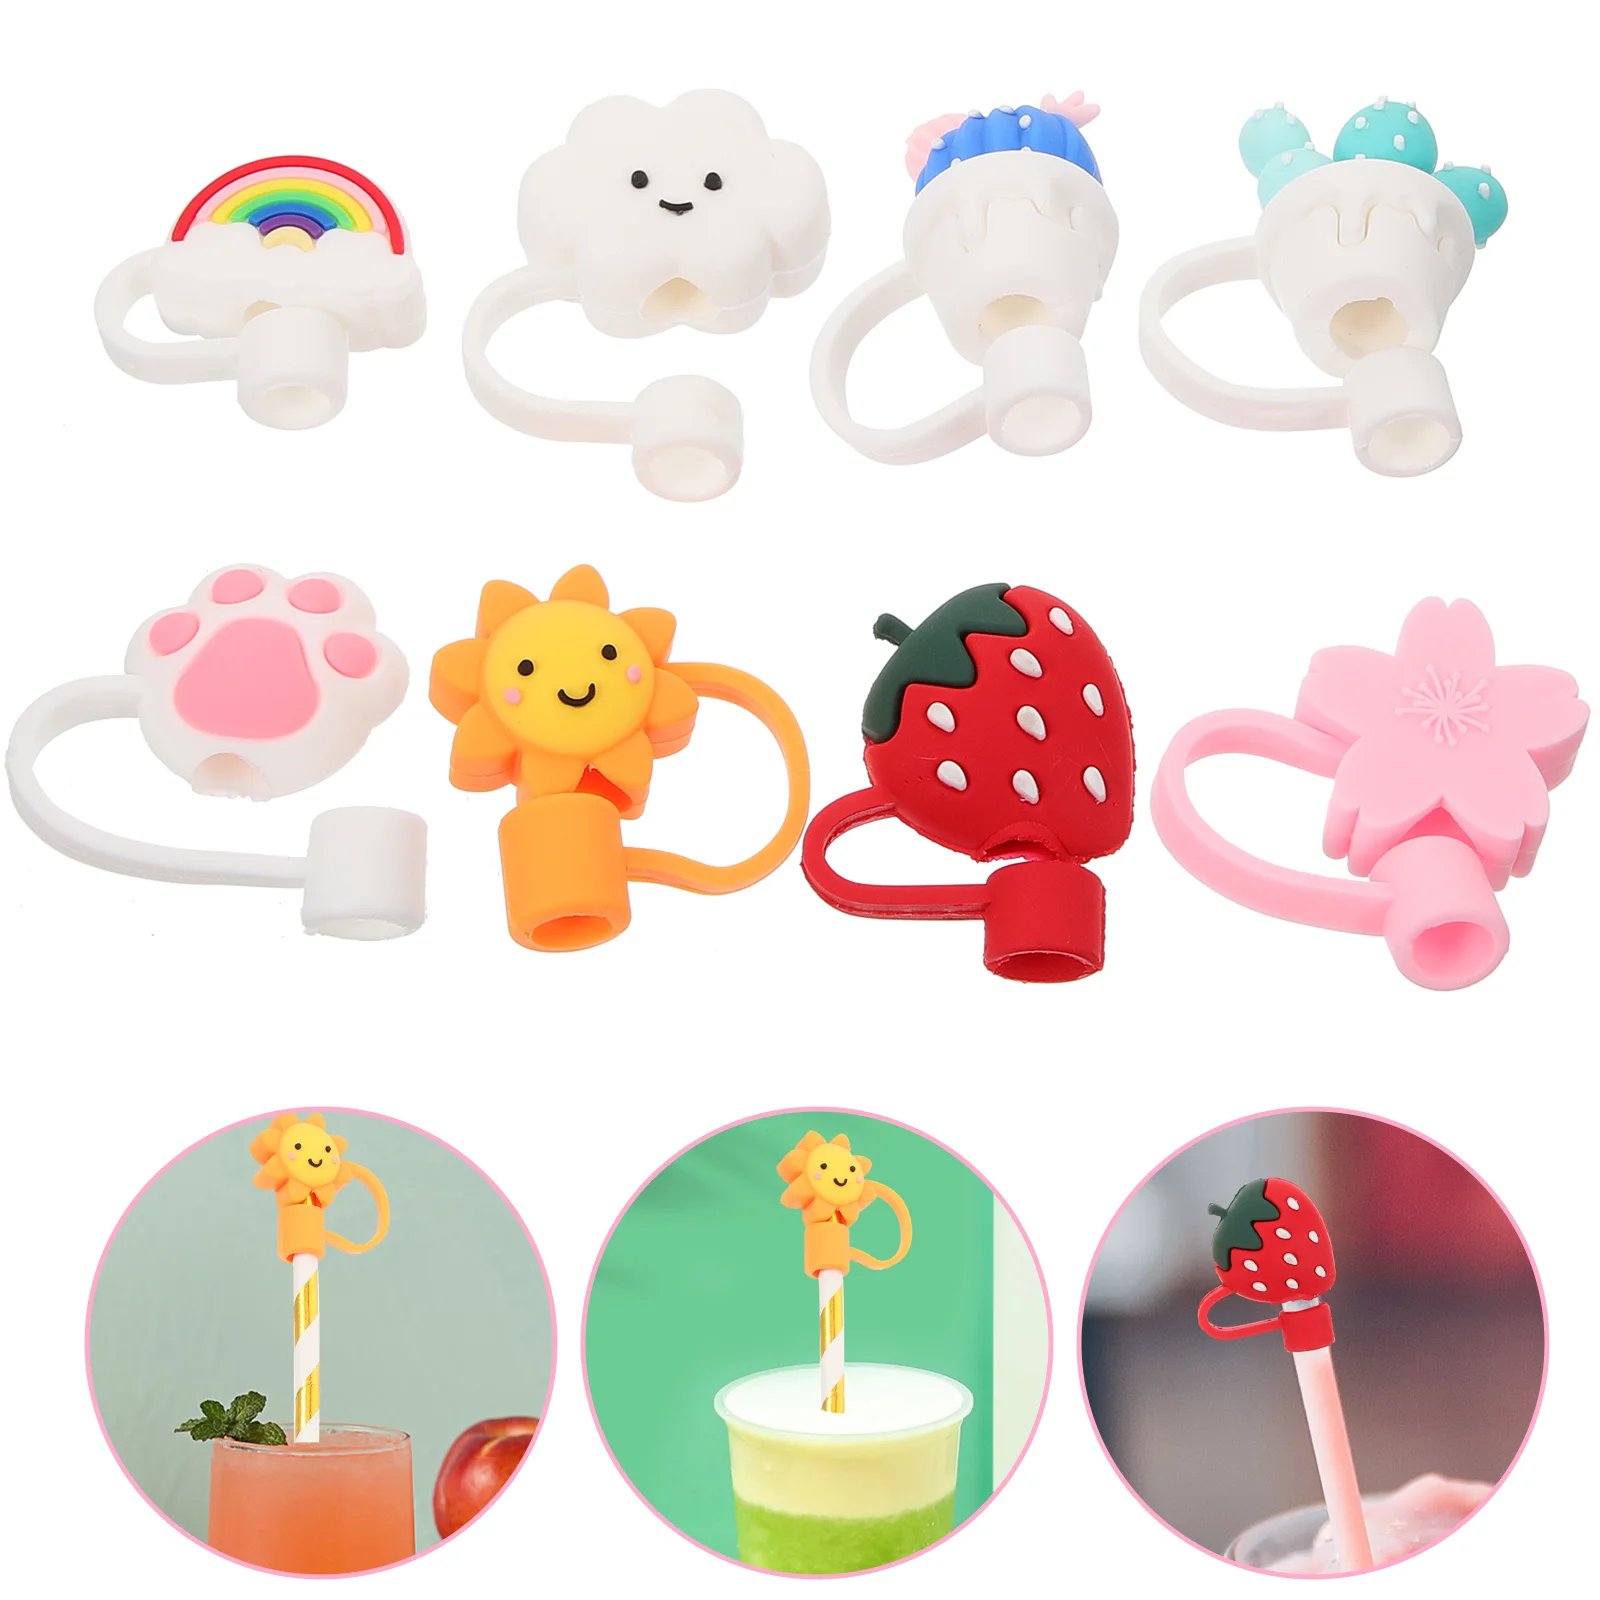 

8pcs Straw Covers Straw Lids Straw End Plugs Silicone Straw Covers Straw Toppers Decors